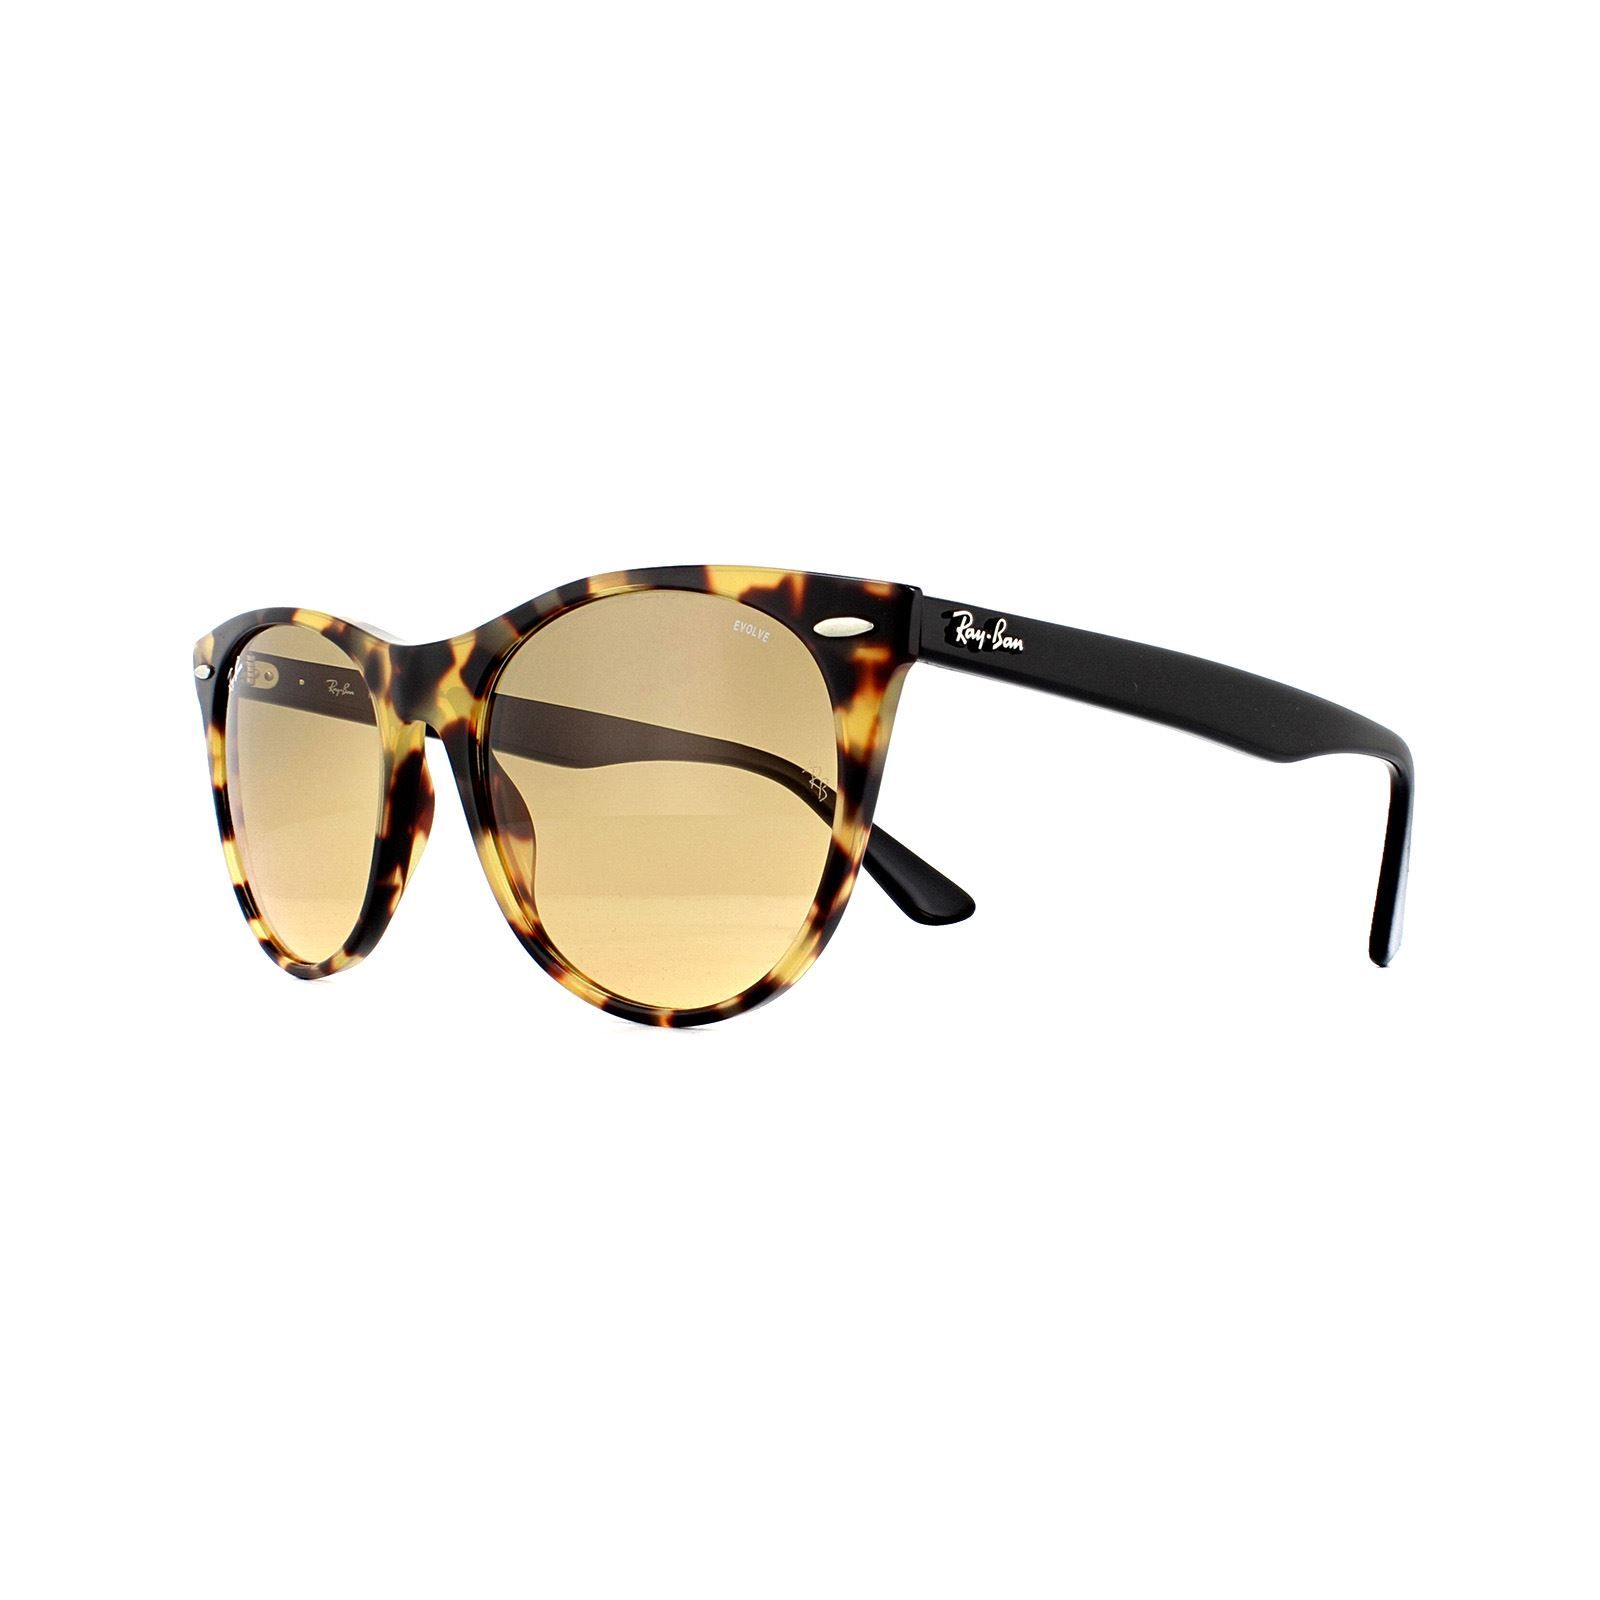 Ray-Ban Wayfarer II RB2185 1248AC Yellow Havana and Black Orange Photochromic are the newest addition to the Wayfarer collection. The Wayfarer II Evolve has taken on a rounded shape for the modern age. With typical Wayfarer characteristics, there's no denying which family these belong to. CornerÂ flicks, winged temples and hinge pins have all been taken from the original Wayfarer. The slim acetate frame and skinny temples deliver a cool and sophisticated feel.